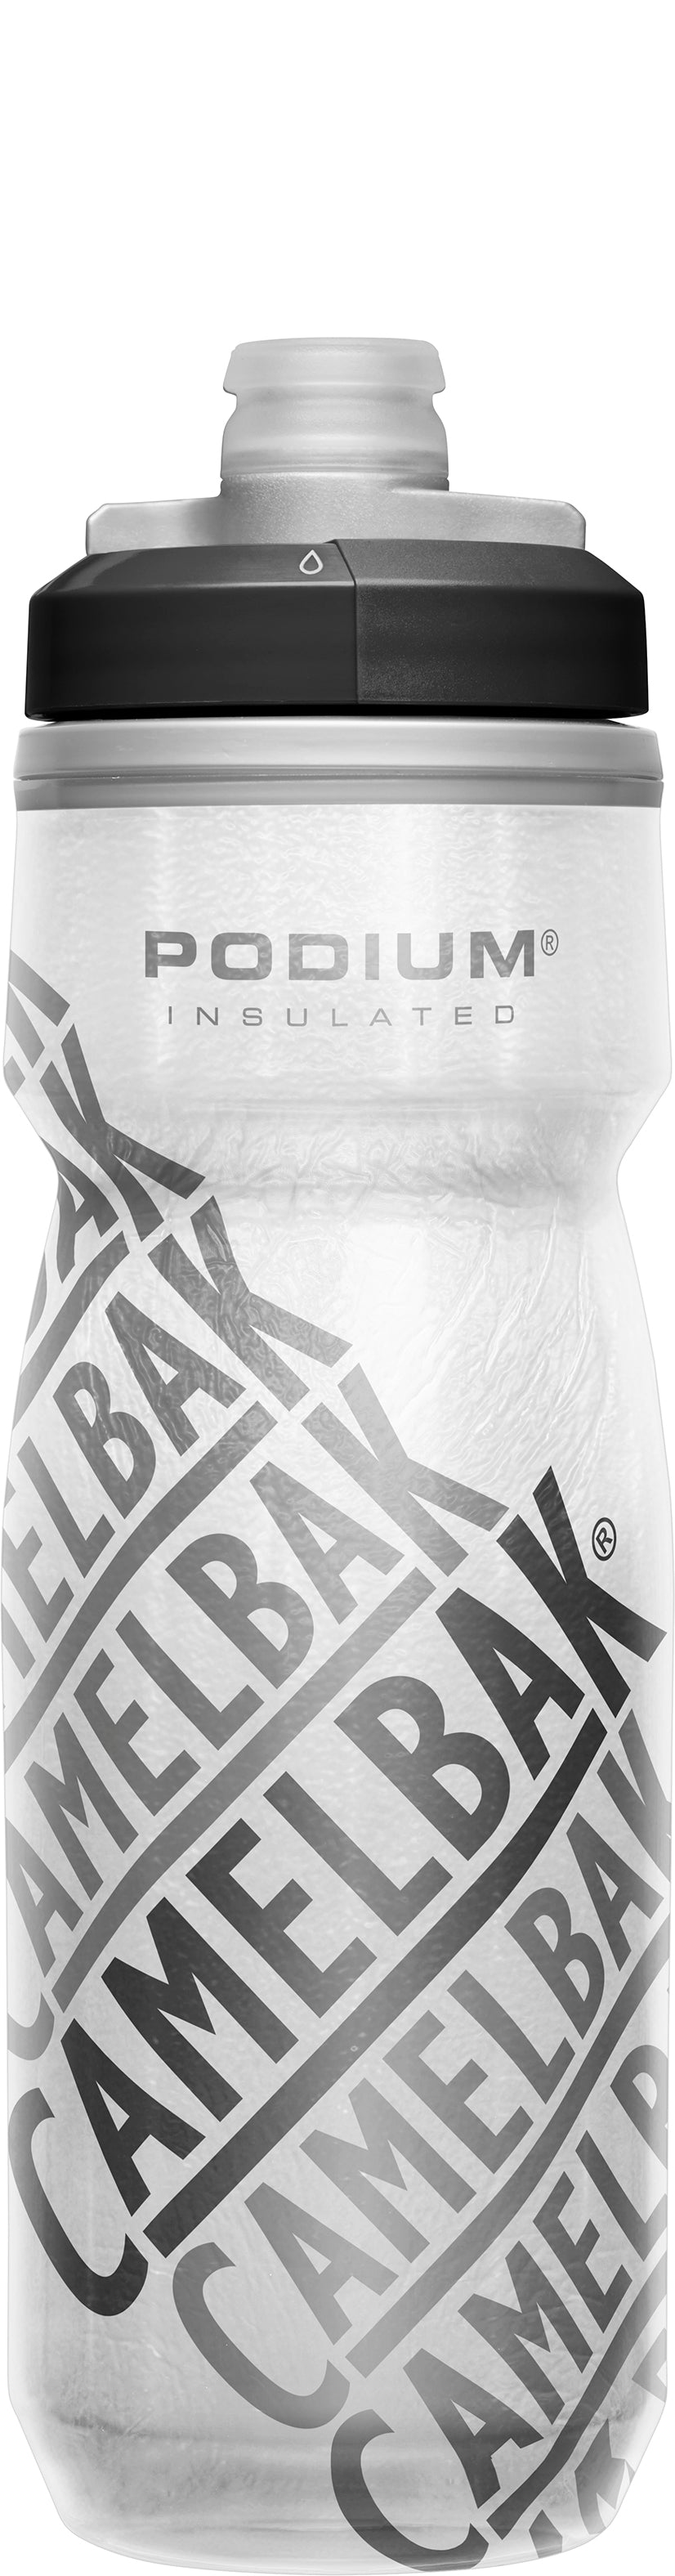 Camelbak Podium Chill Dirt Series Insulated Water Bottle (White) (21oz) -  Performance Bicycle